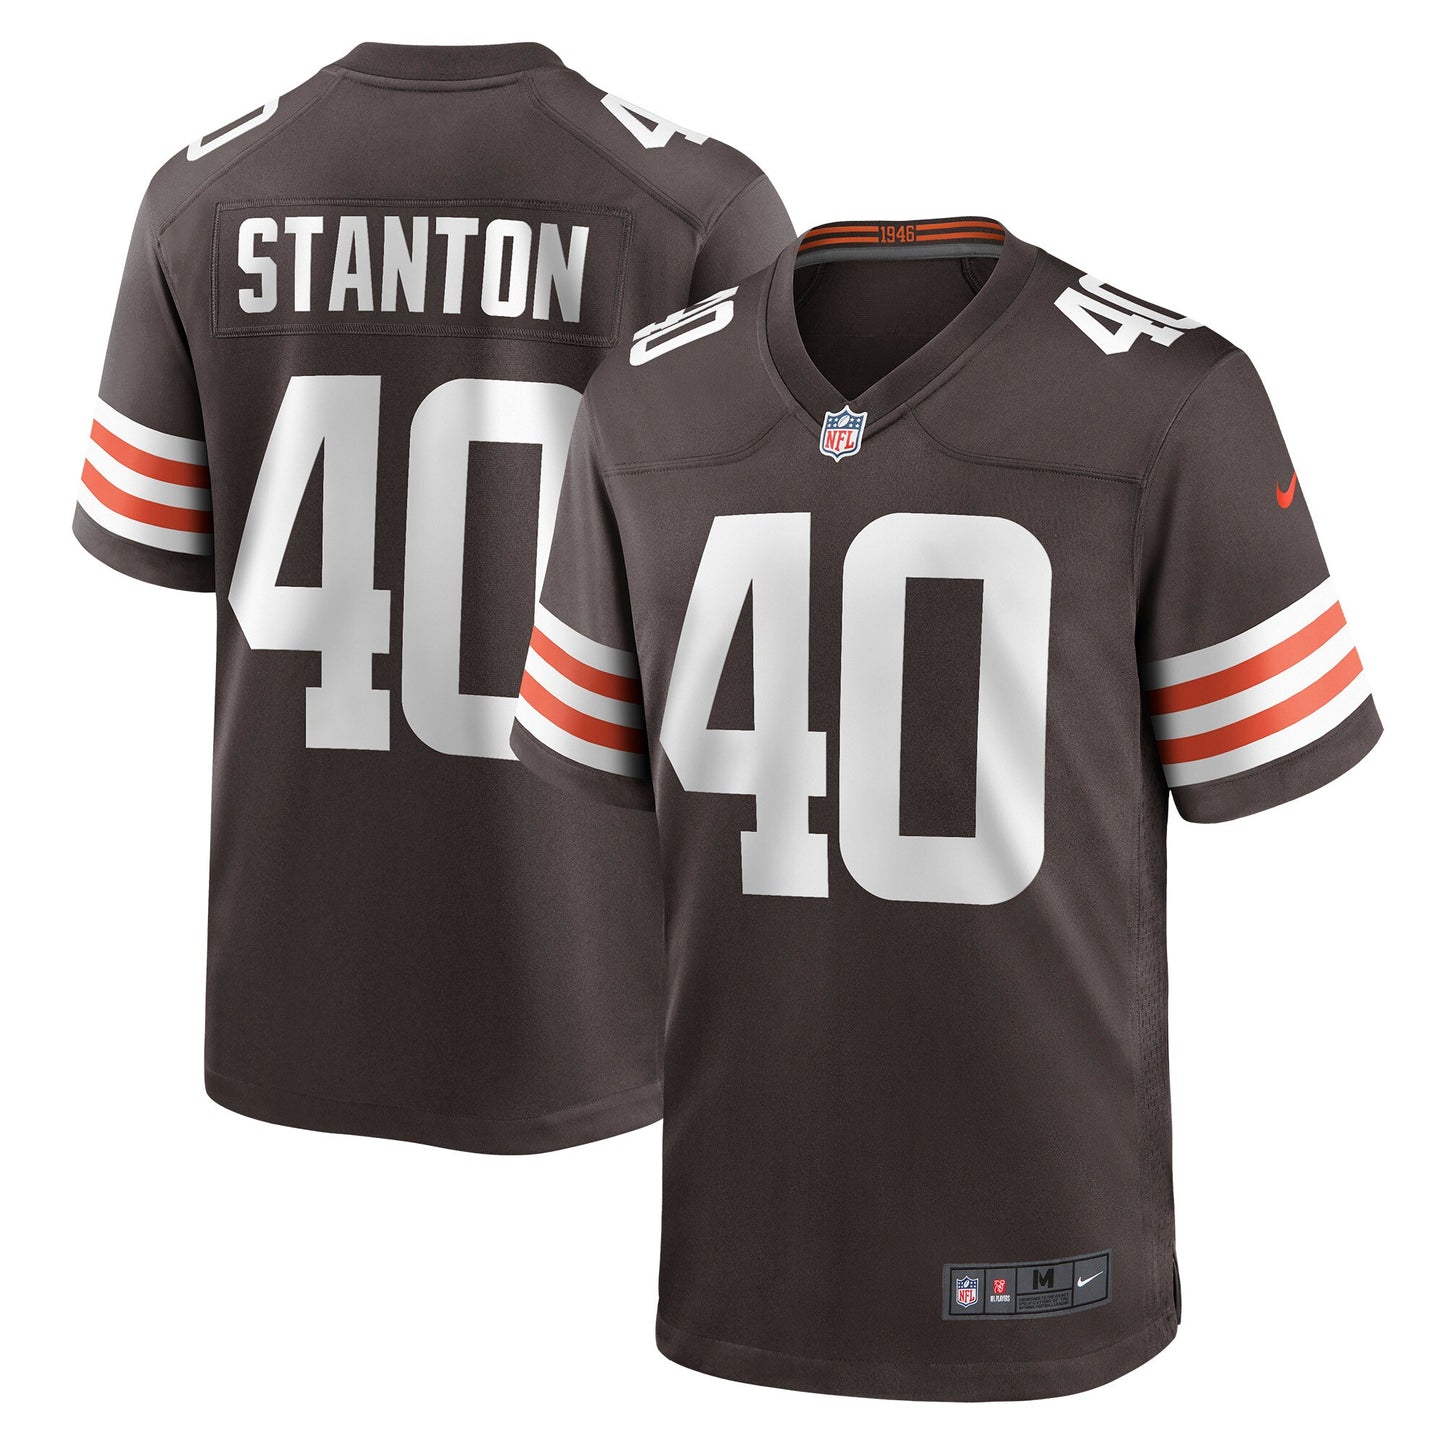 Johnny Stanton Cleveland Browns Nike Game Jersey - Brown